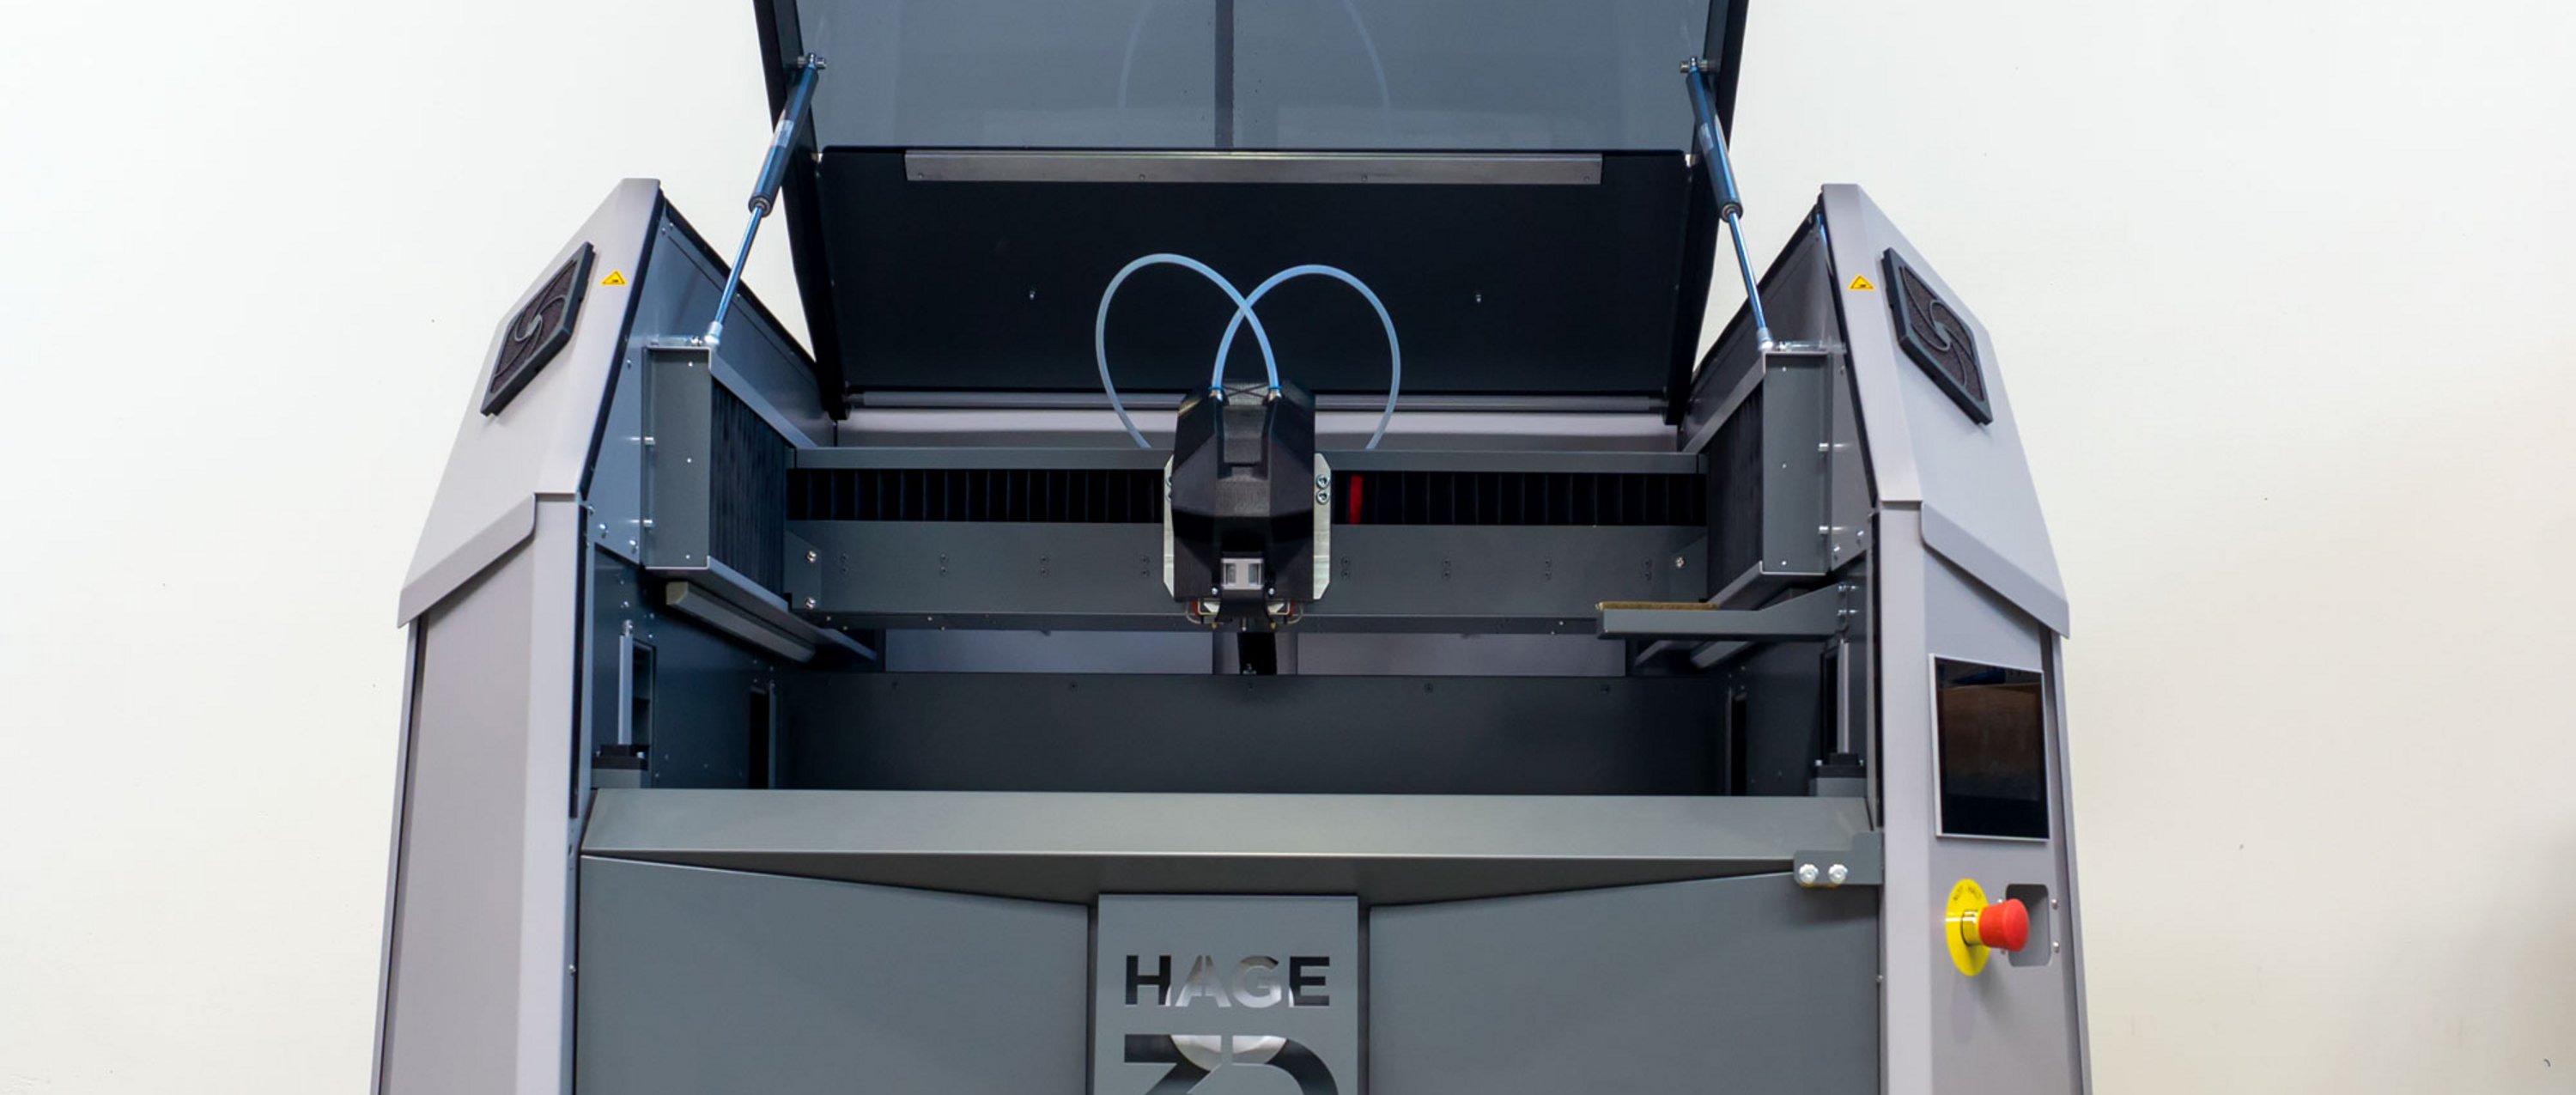 3d printer for additive material extrusion